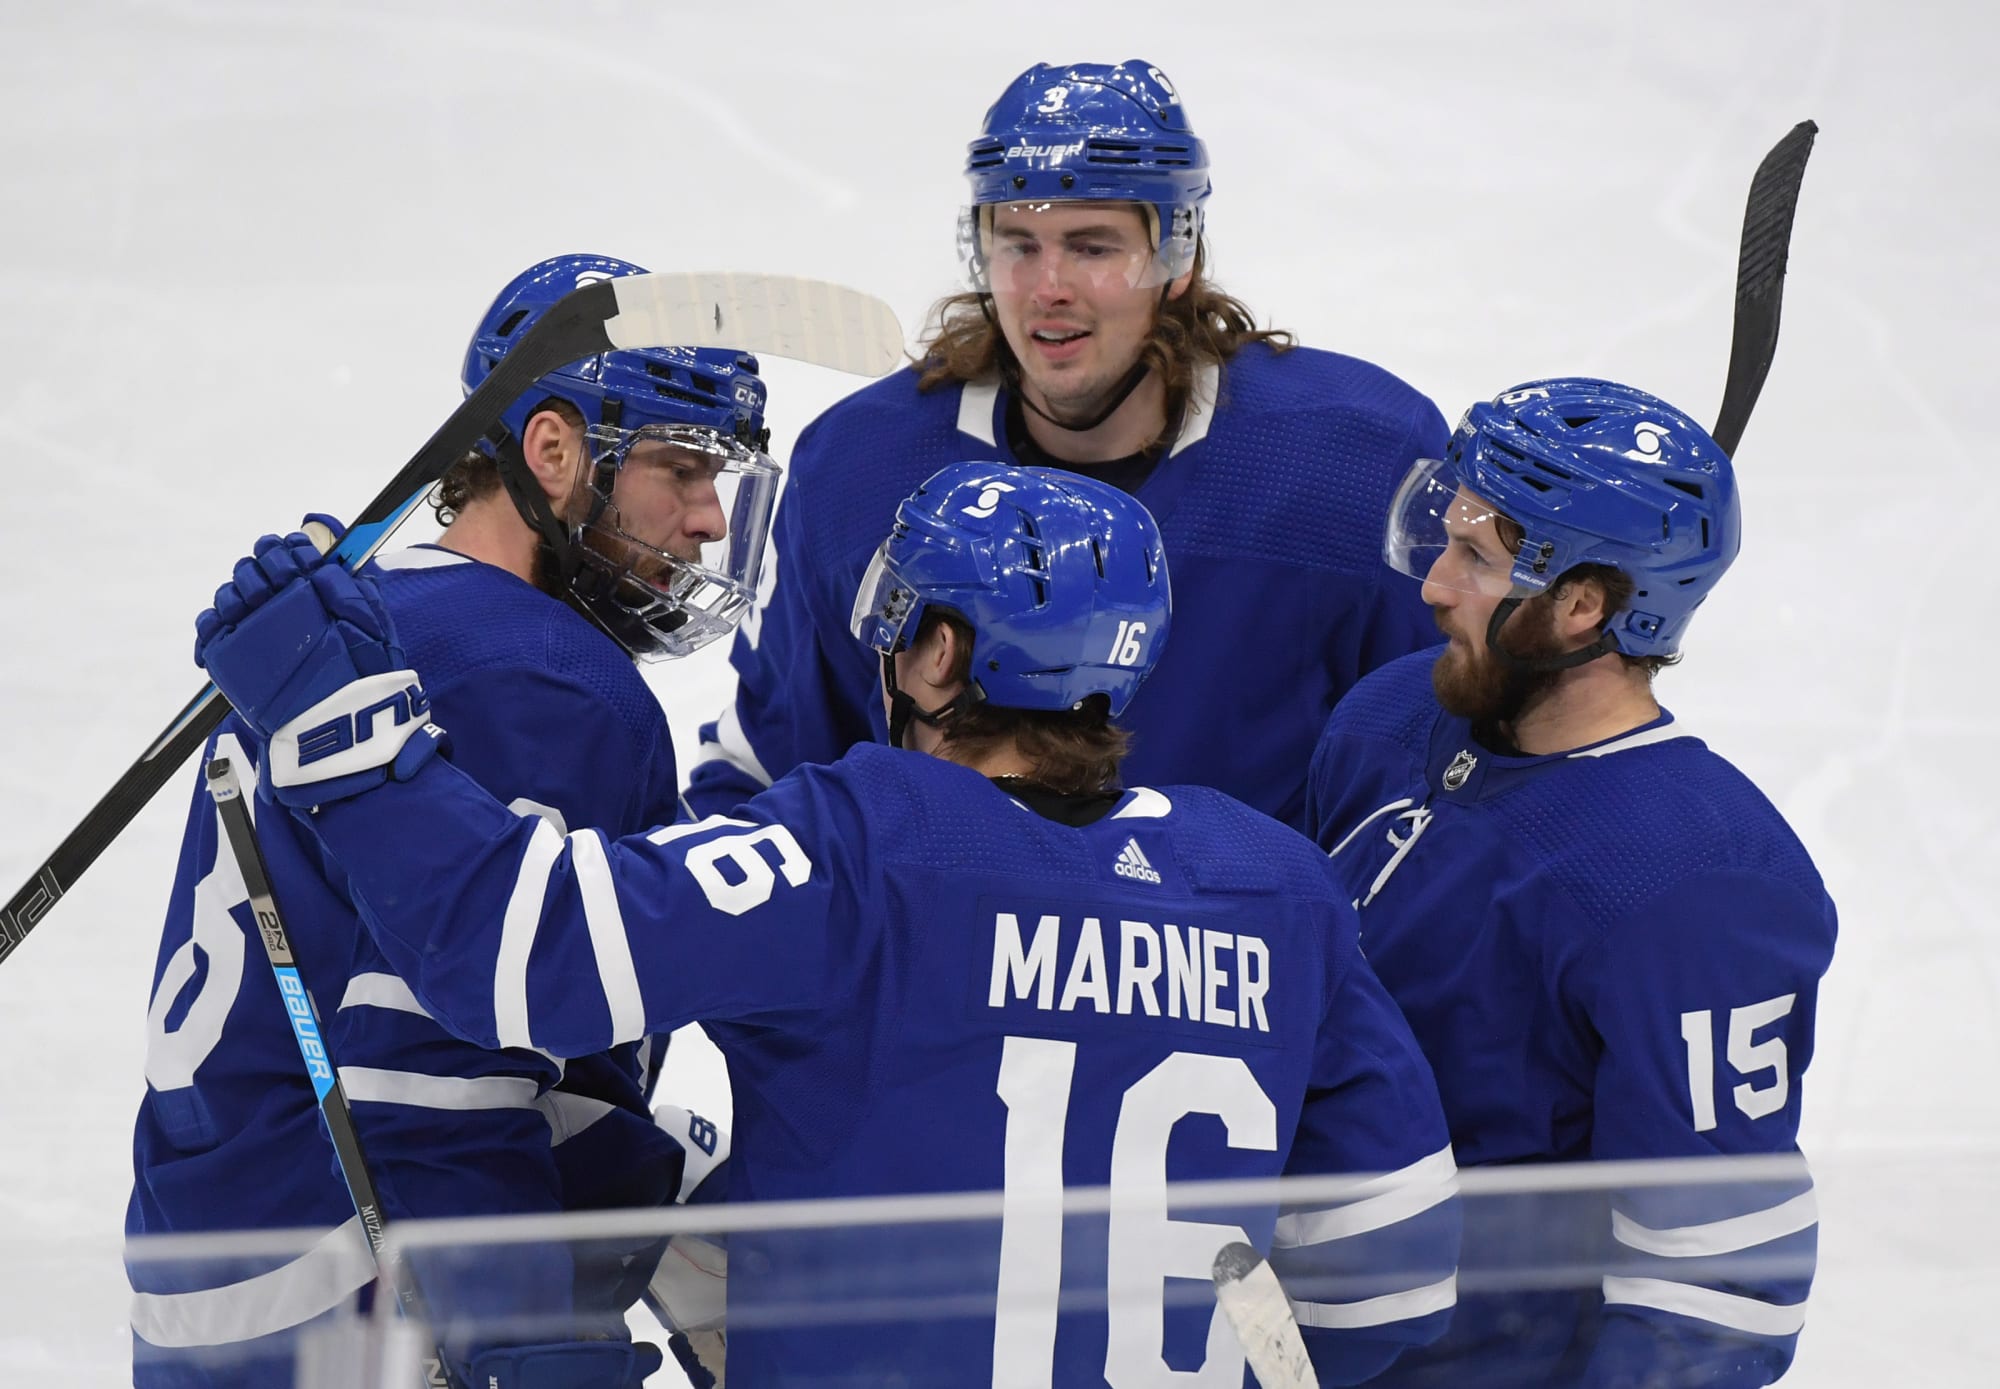 Toronto Maple Leafs Notes, Scuttlebutt and News from Camp